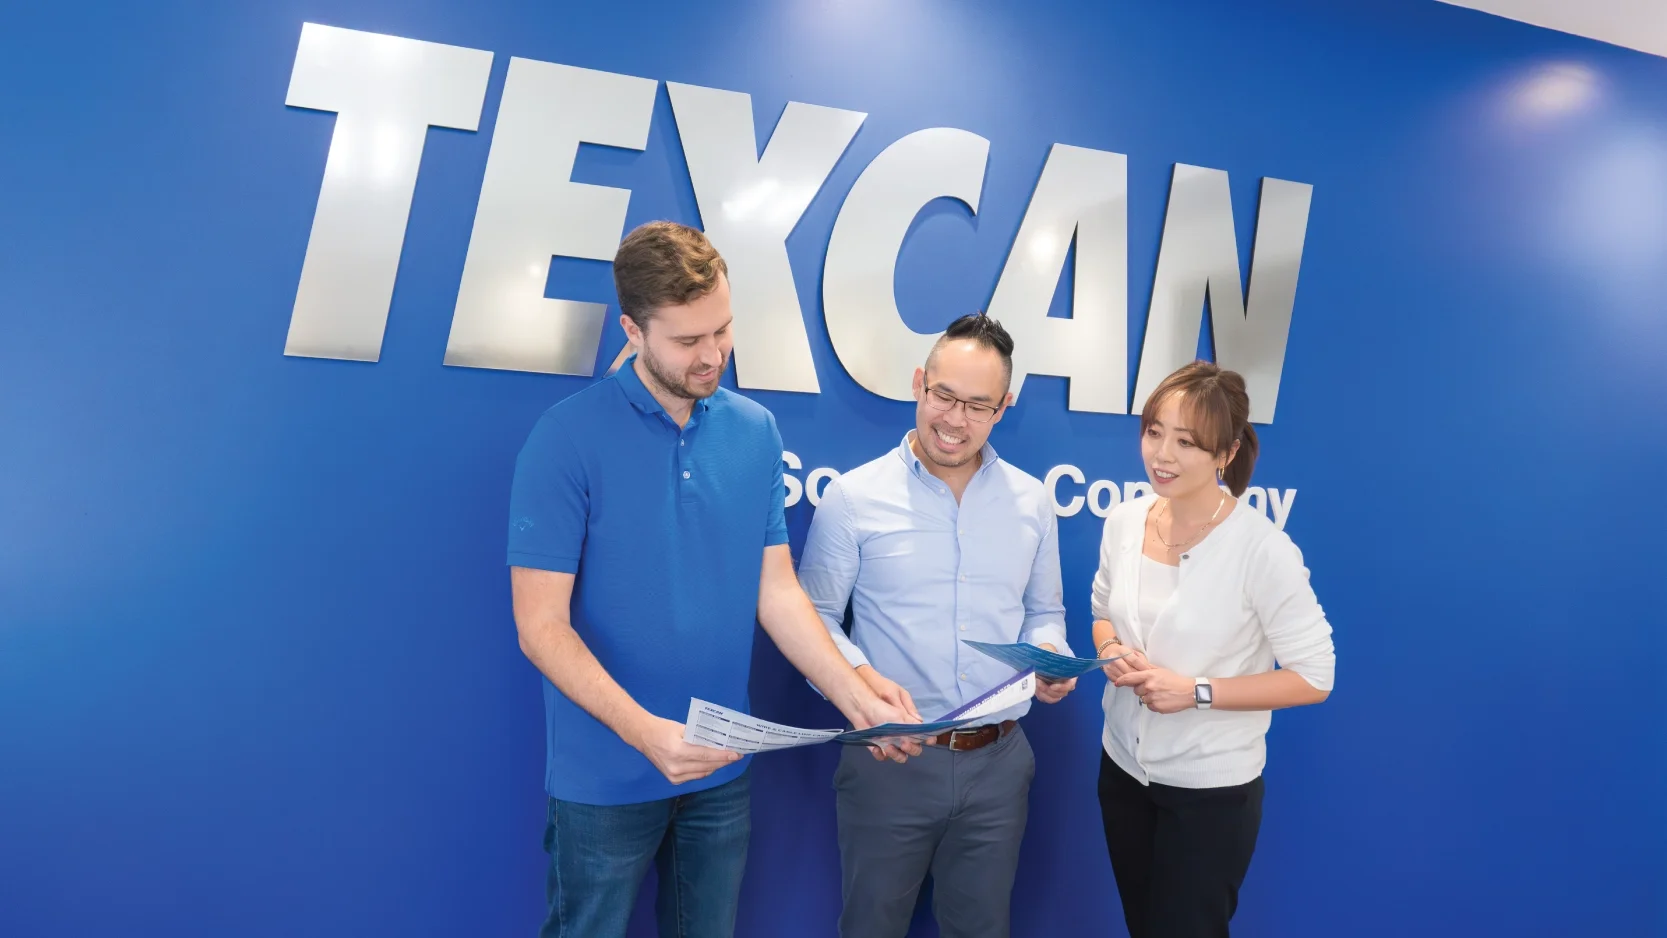 Texcan - Corporate Overview Body Images 2023 - Experienced Wire & Cable Experts